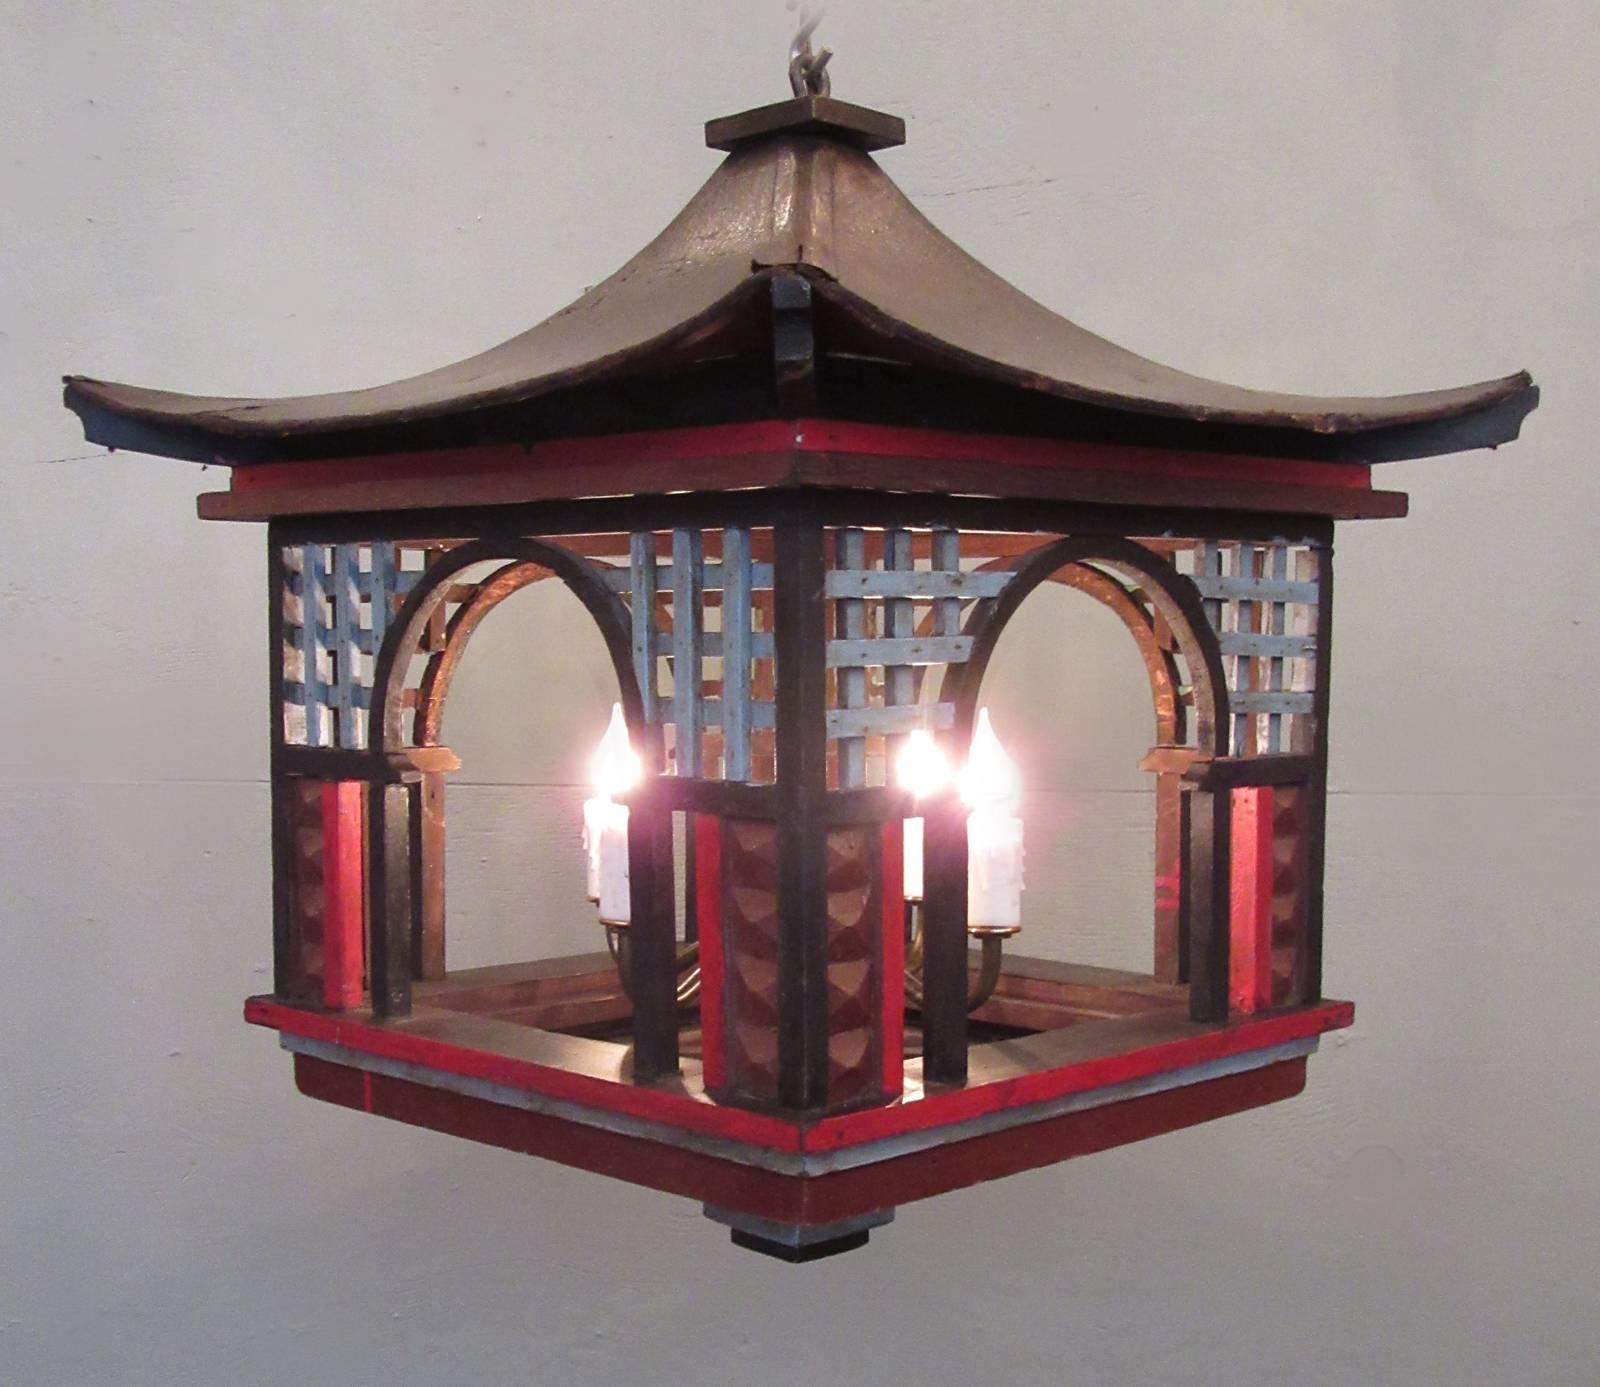 A charming pagoda lantern made in France, circa 1920, made of painted wood and papier mâché and featuring four candle bulbs. The lantern has been recently rewired with new porcelain sockets.